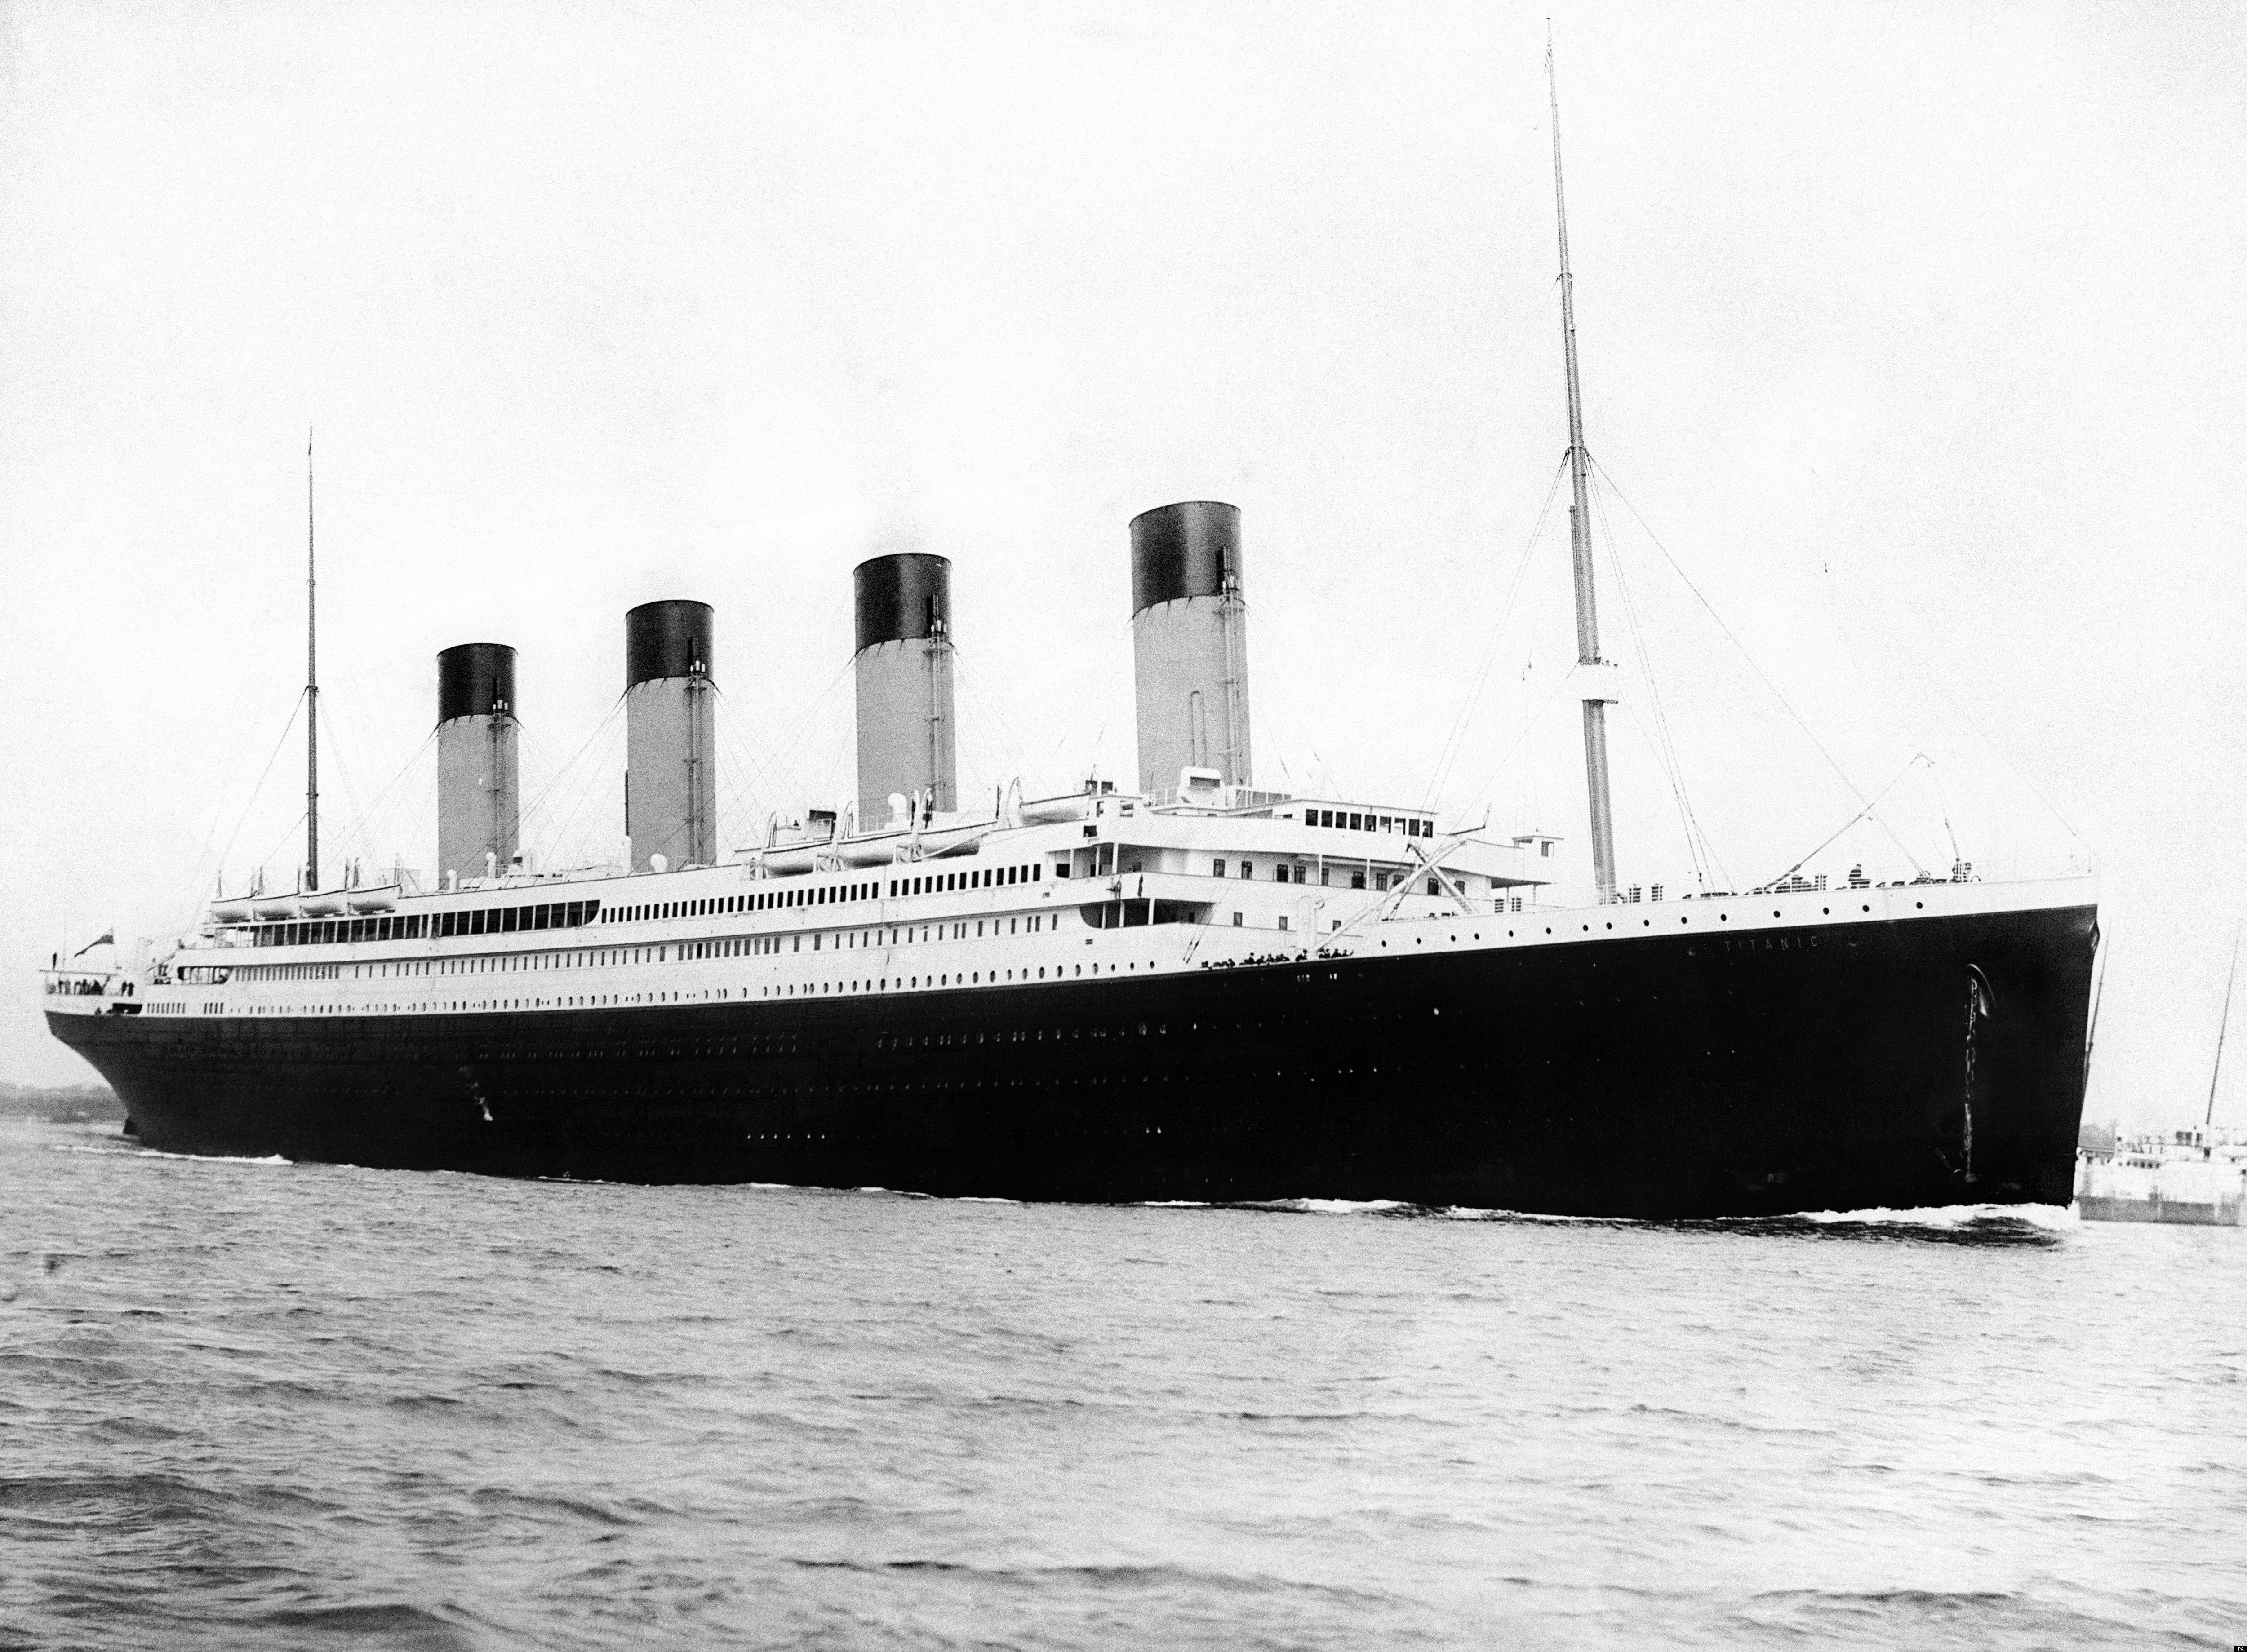 Image of the RMS Titanic (damage from iceberg not included)